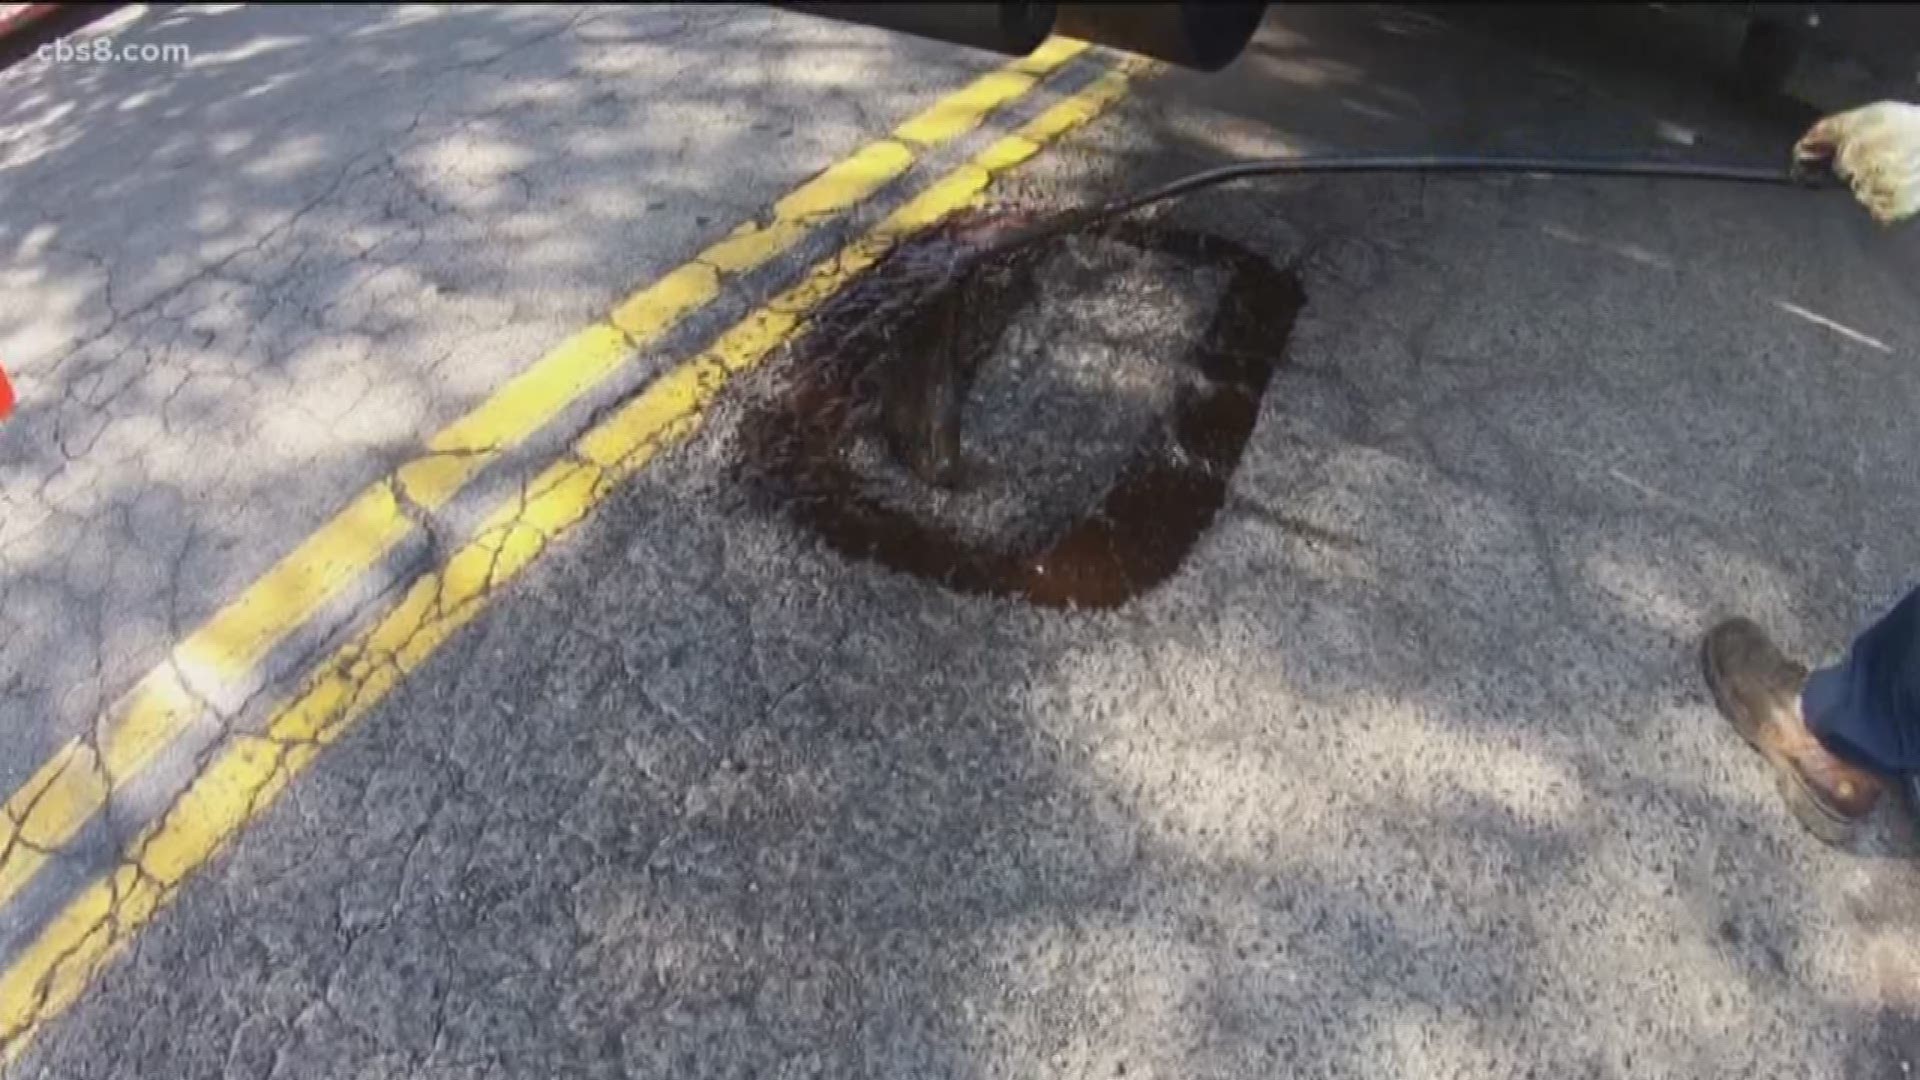 Data shows Clairemont Mesa and Mira Mesa have had highest number of pothole complaints since 2016.